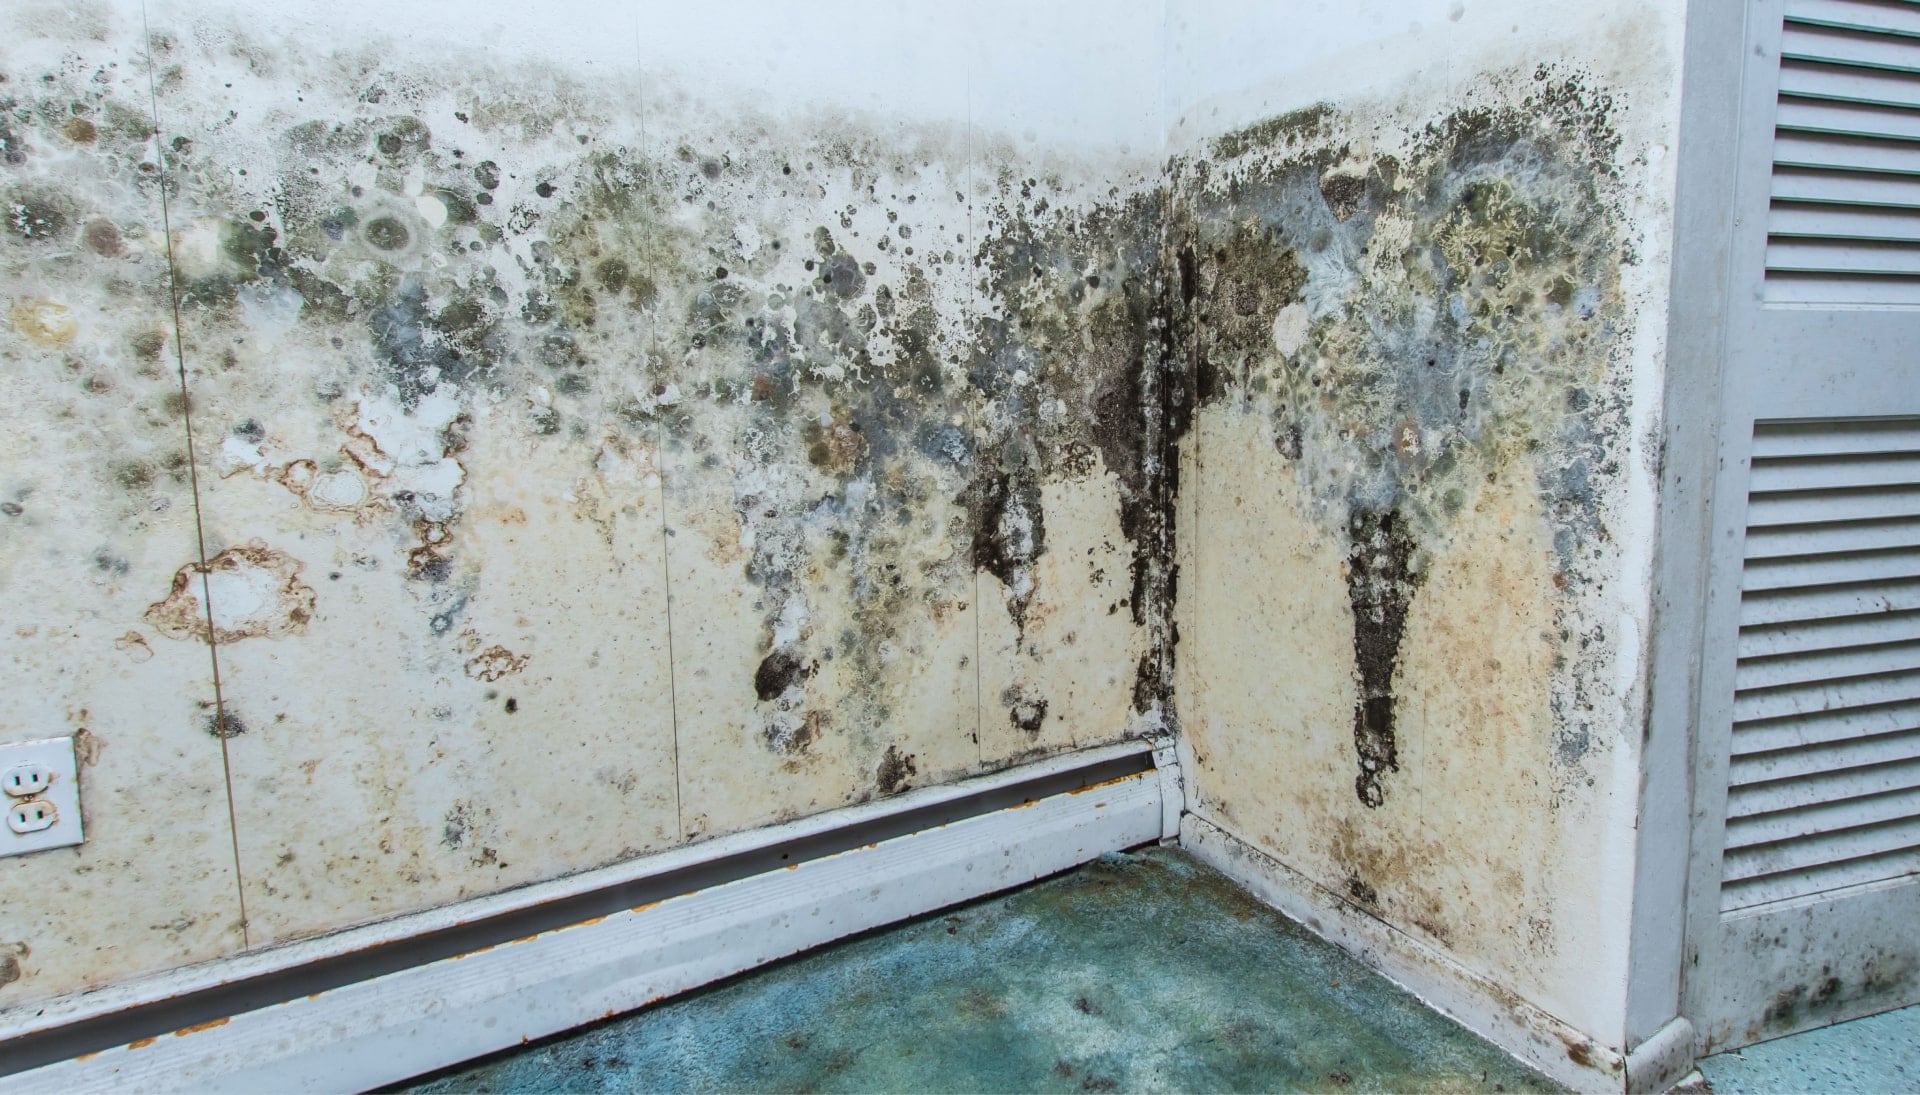 A mold remediation team using specialized techniques to remove mold damage and control odors in a Indianapolis property, with a focus on safety and efficiency